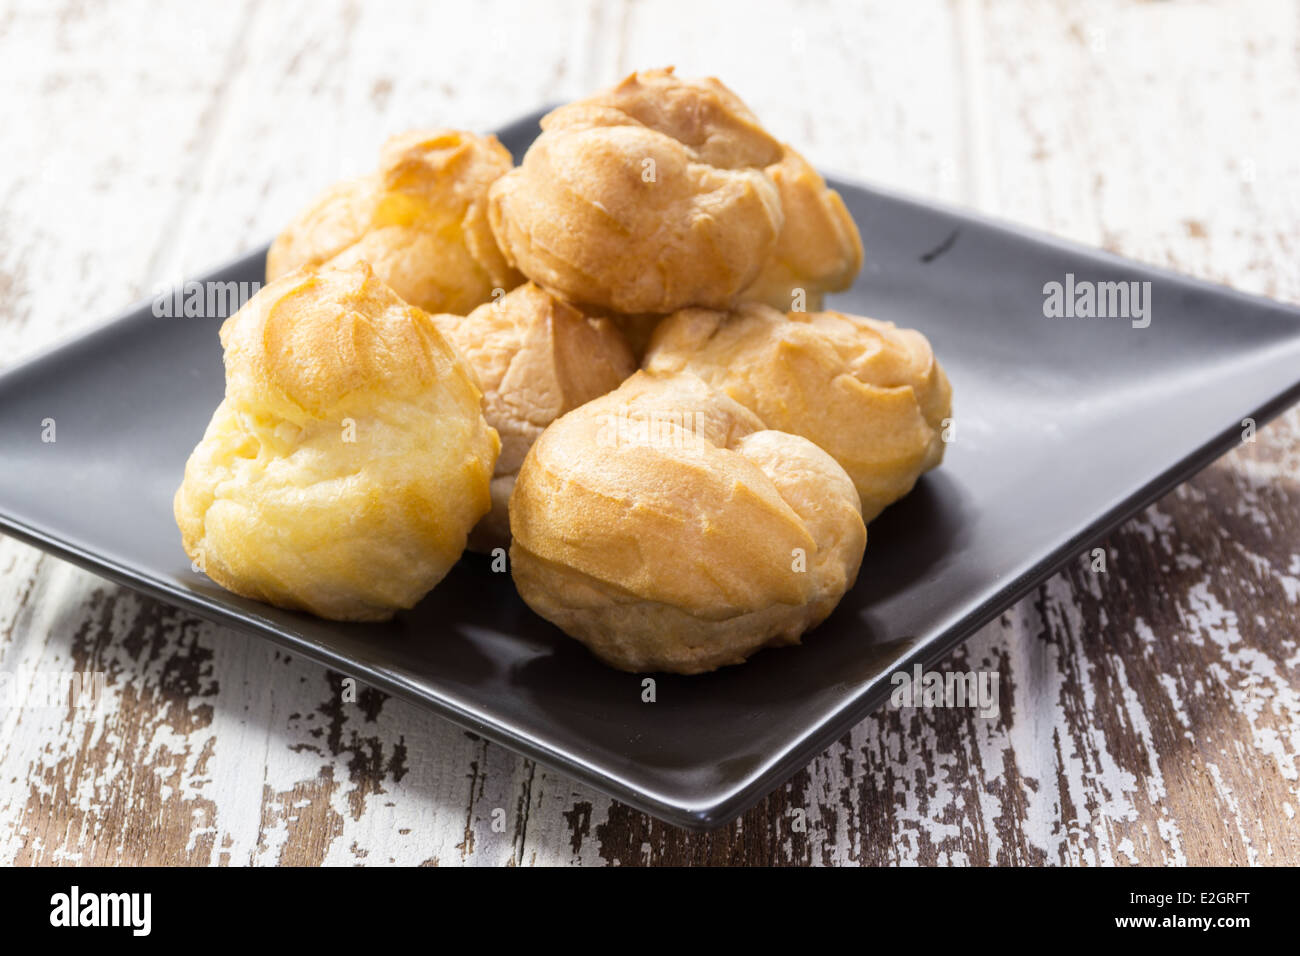 eclair on black ceramic plate on wood background Stock Photo